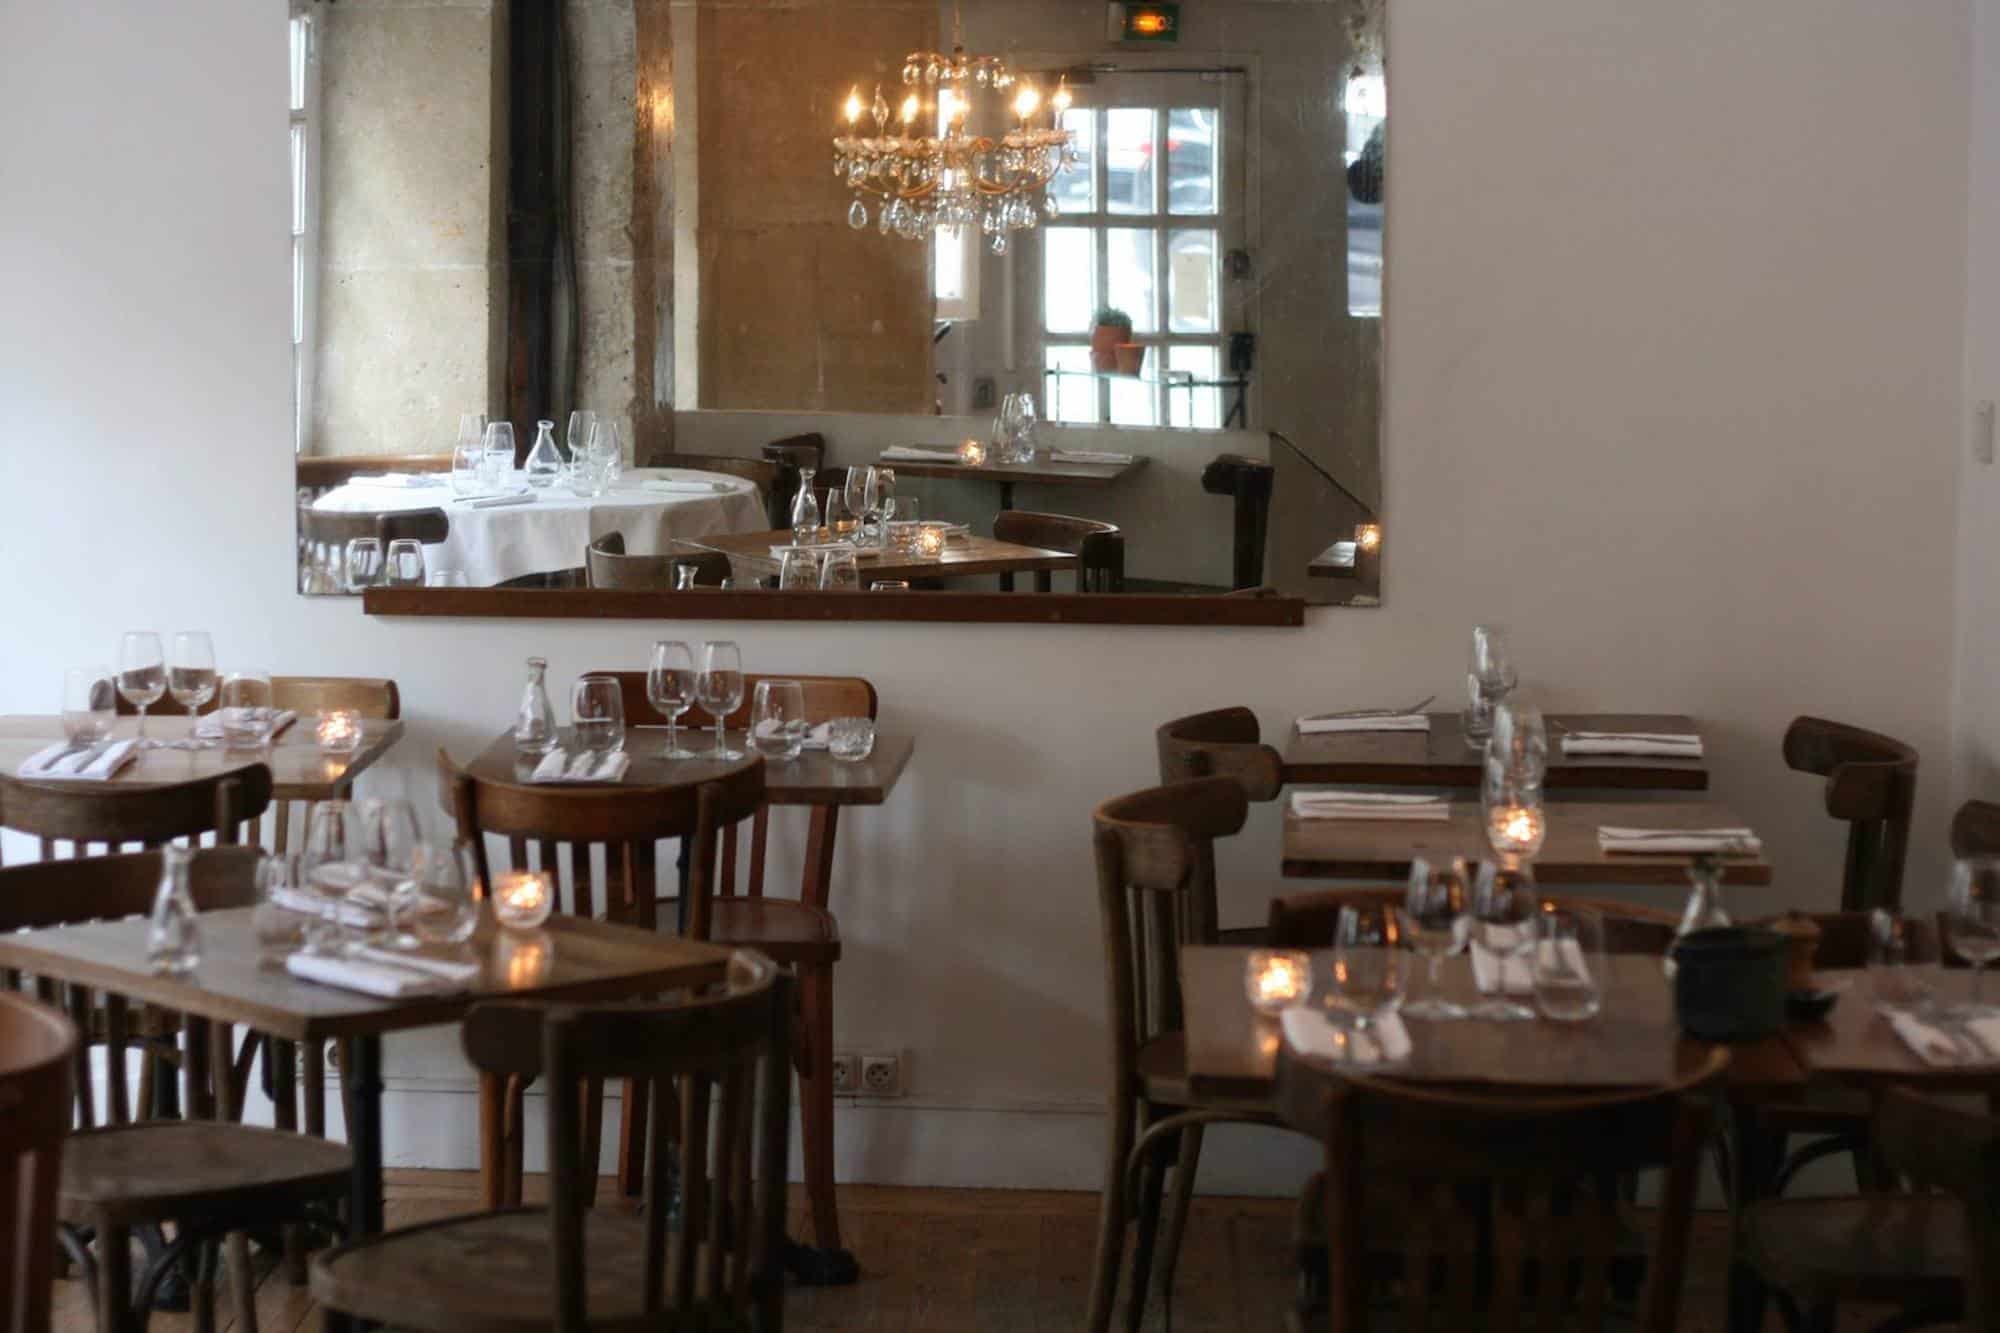 Dilia is one of our favorite Parisian bistros for French food and the pared down interiors with bistro-style tables and chairs.